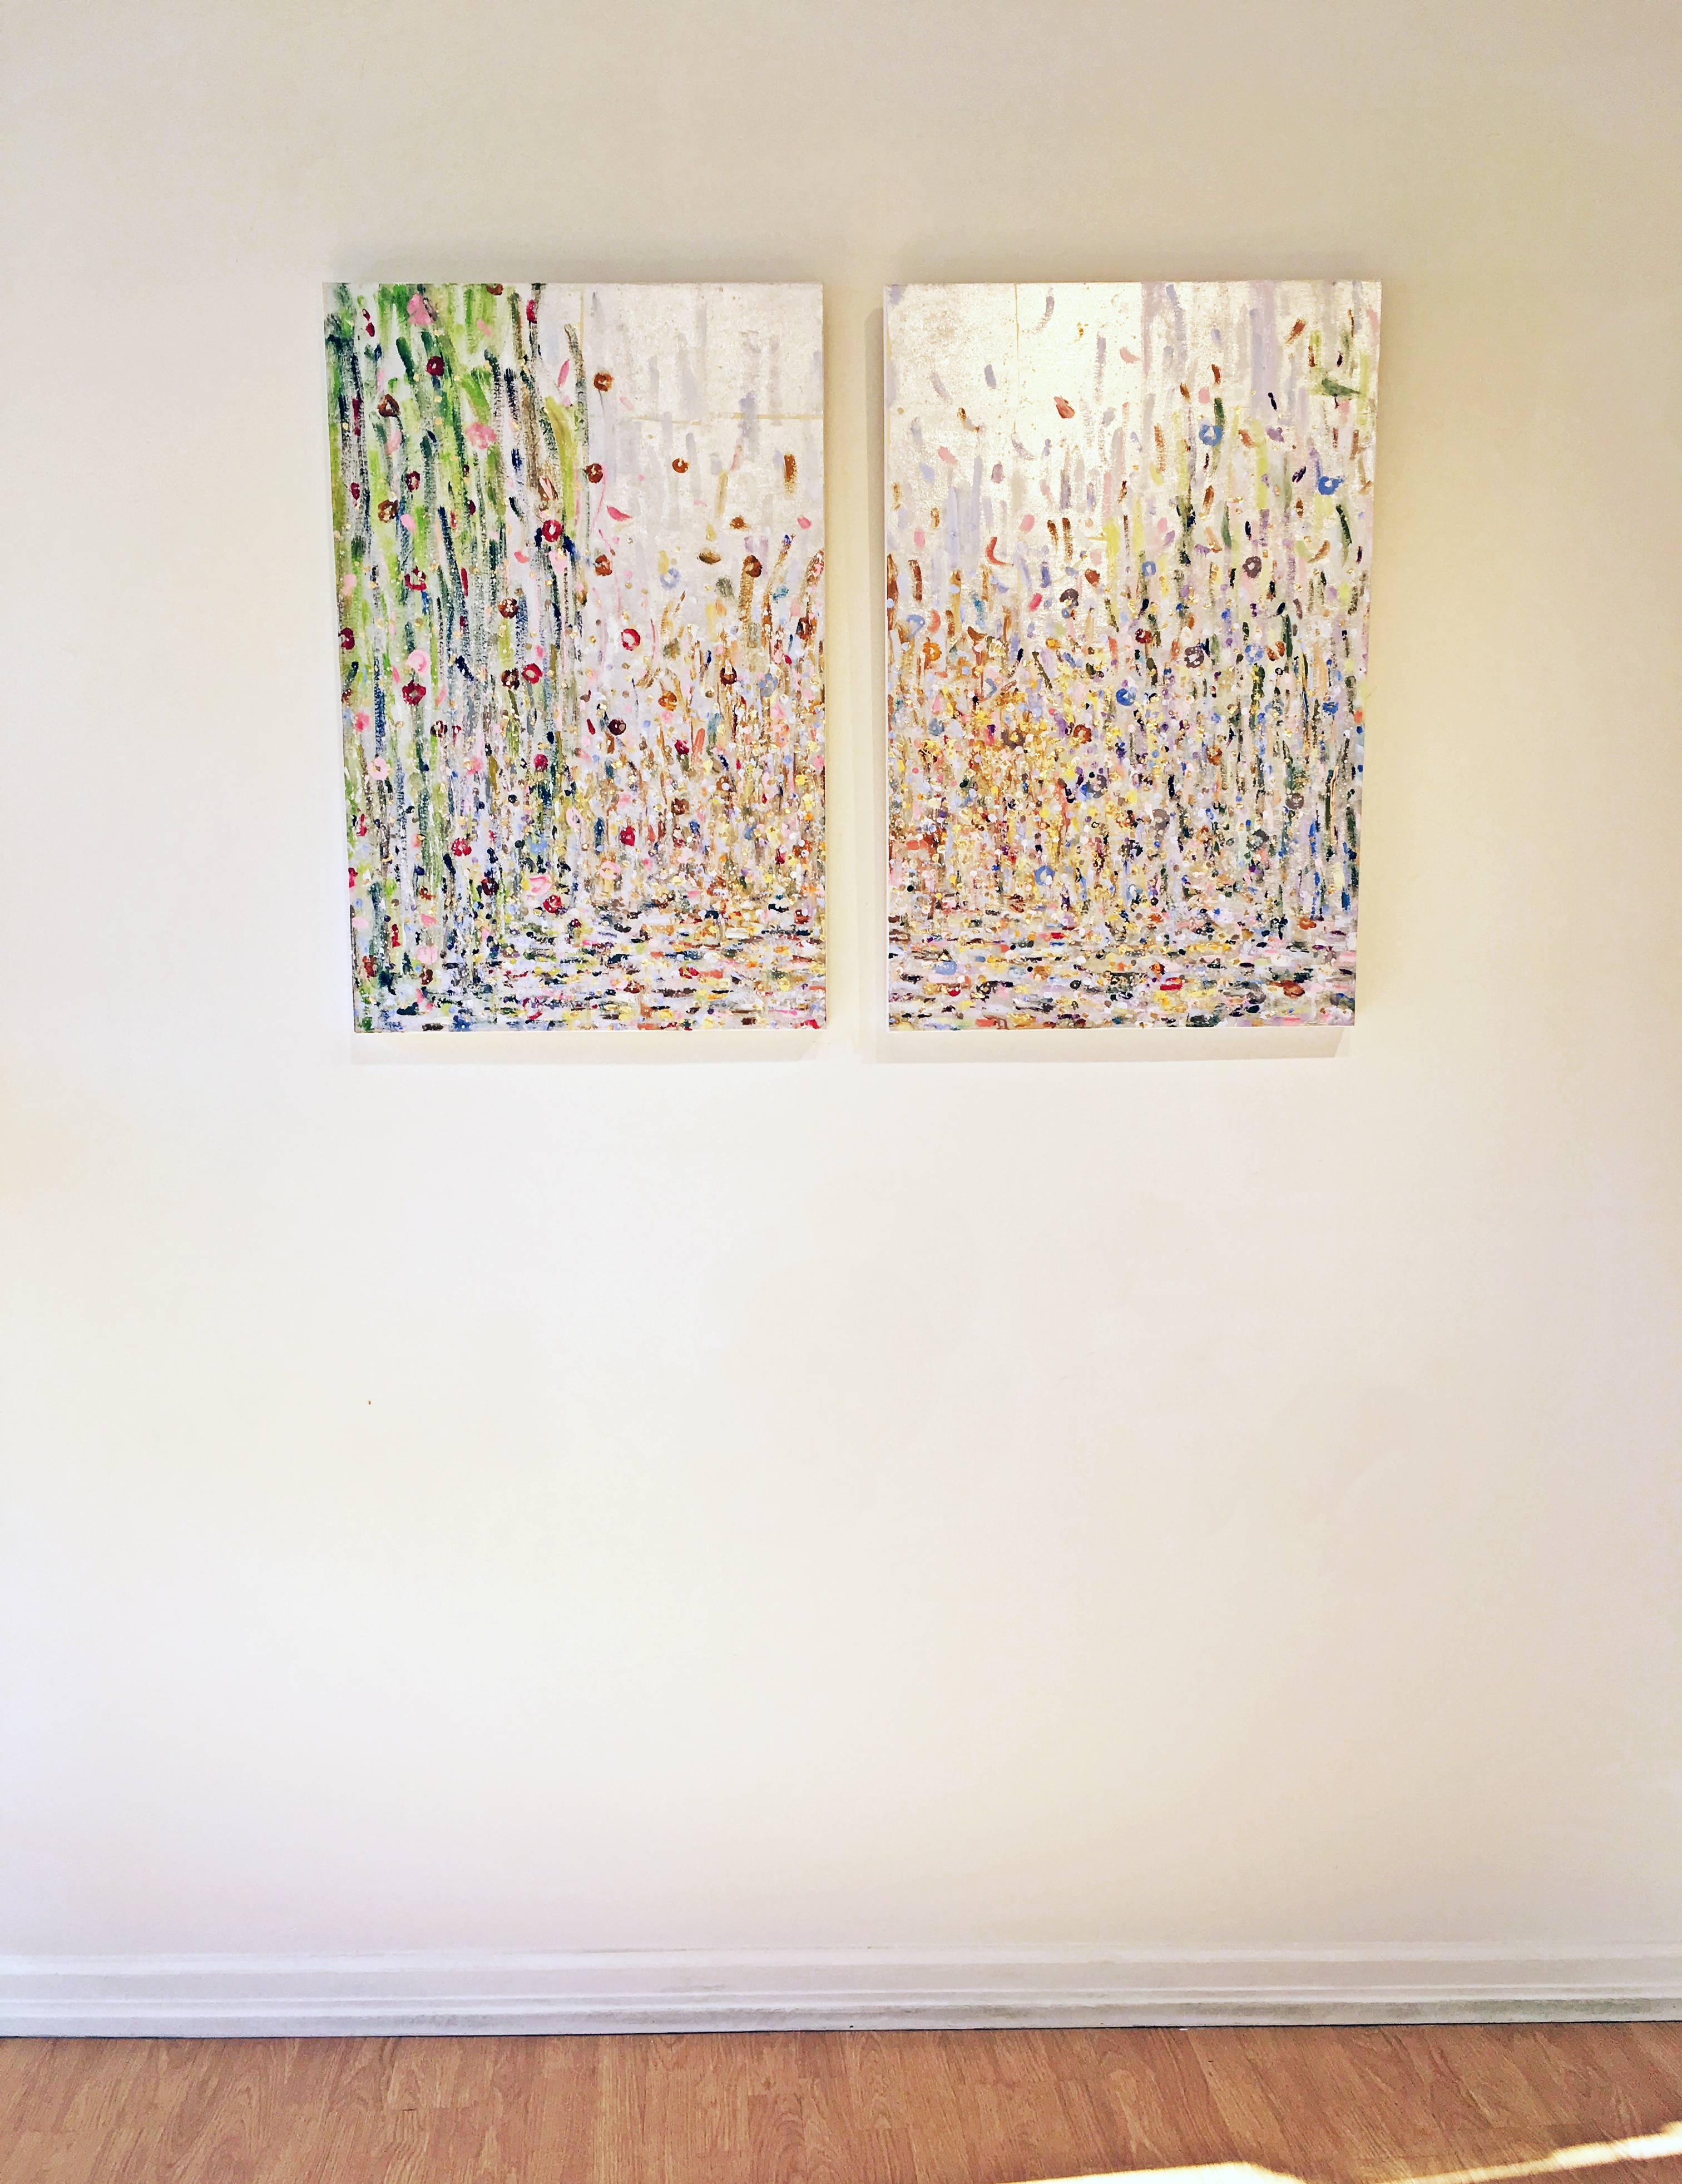 Silver leaf oil painting, Michelle Sakhai, East Meets West Part I & II (Diptych) 2